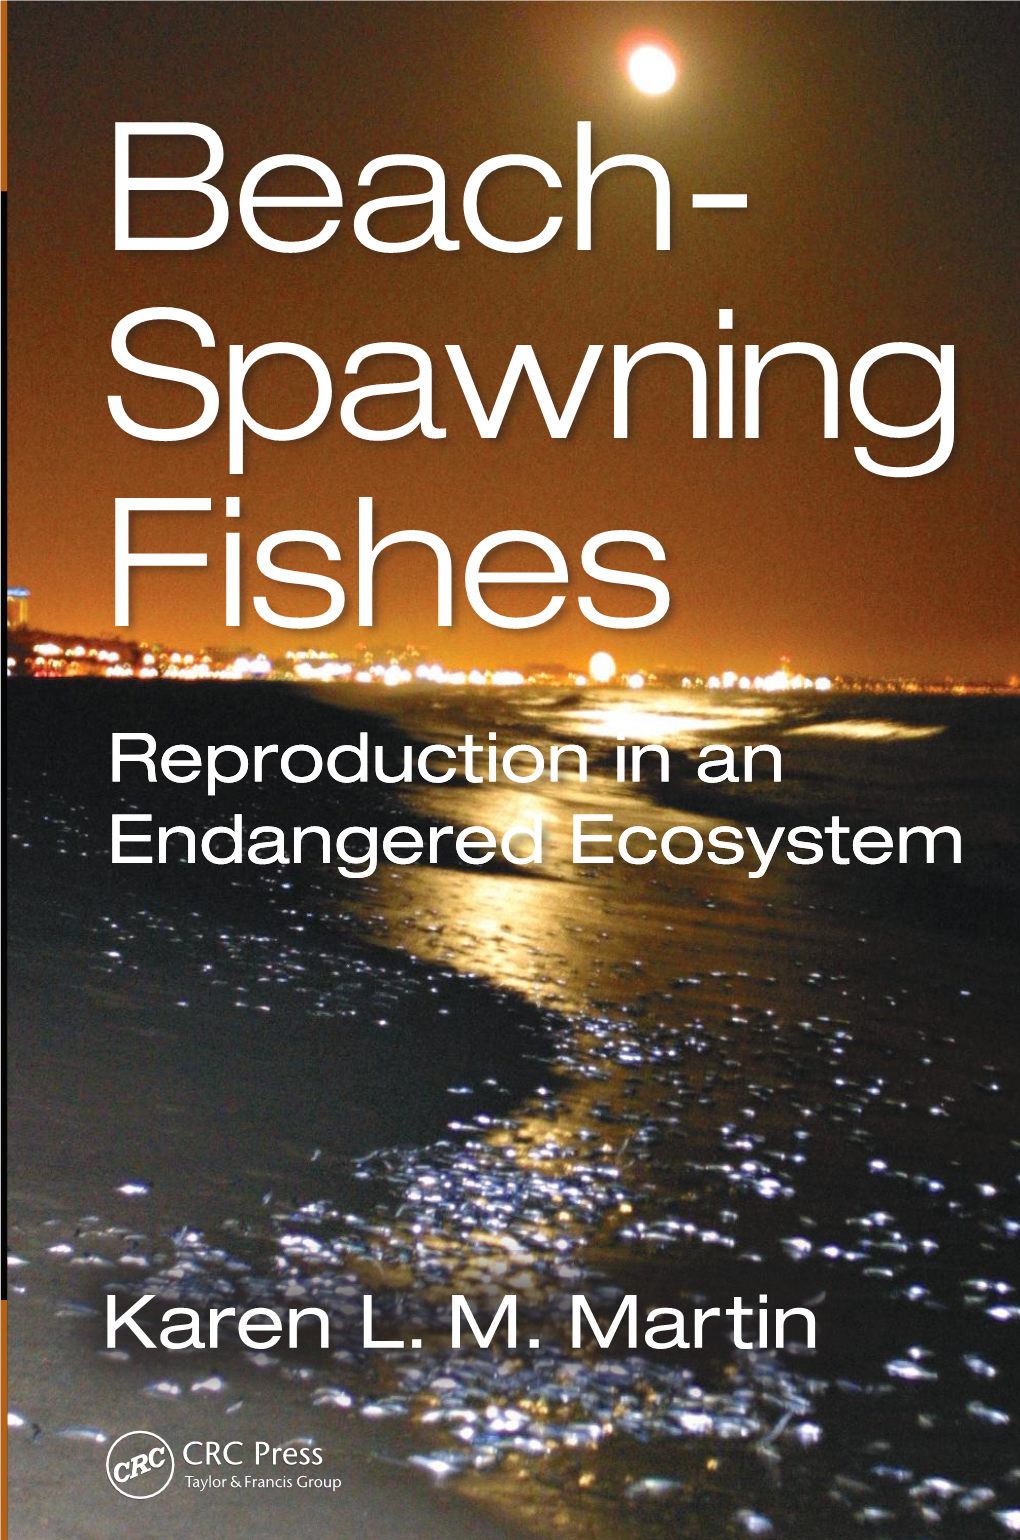 Beach-Spawning Fishes Spawning Reproduction in an Endangered Ecosystem